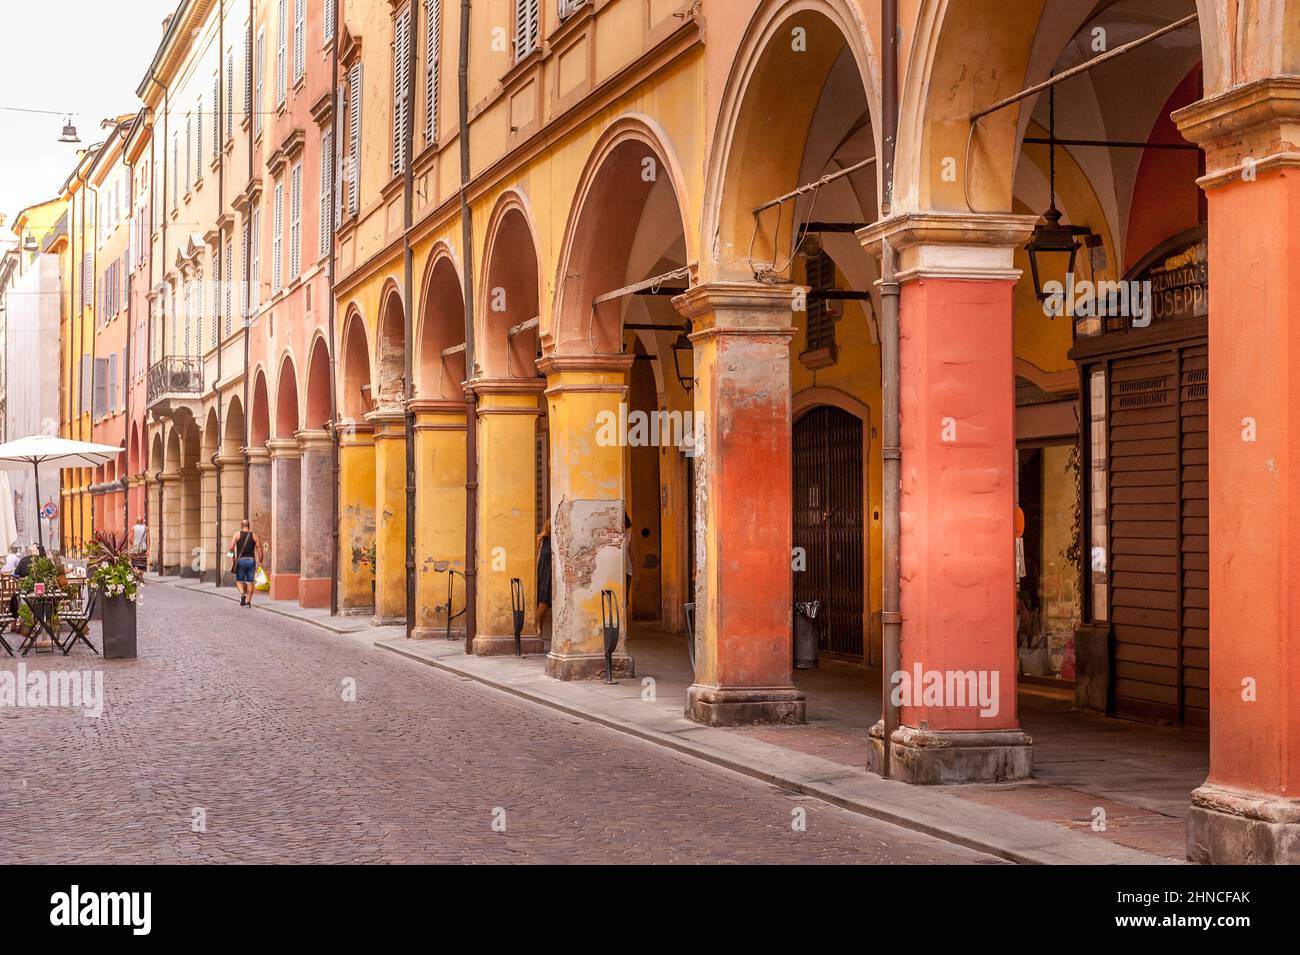 View of central Modena and the architecture of the city Stock Photo